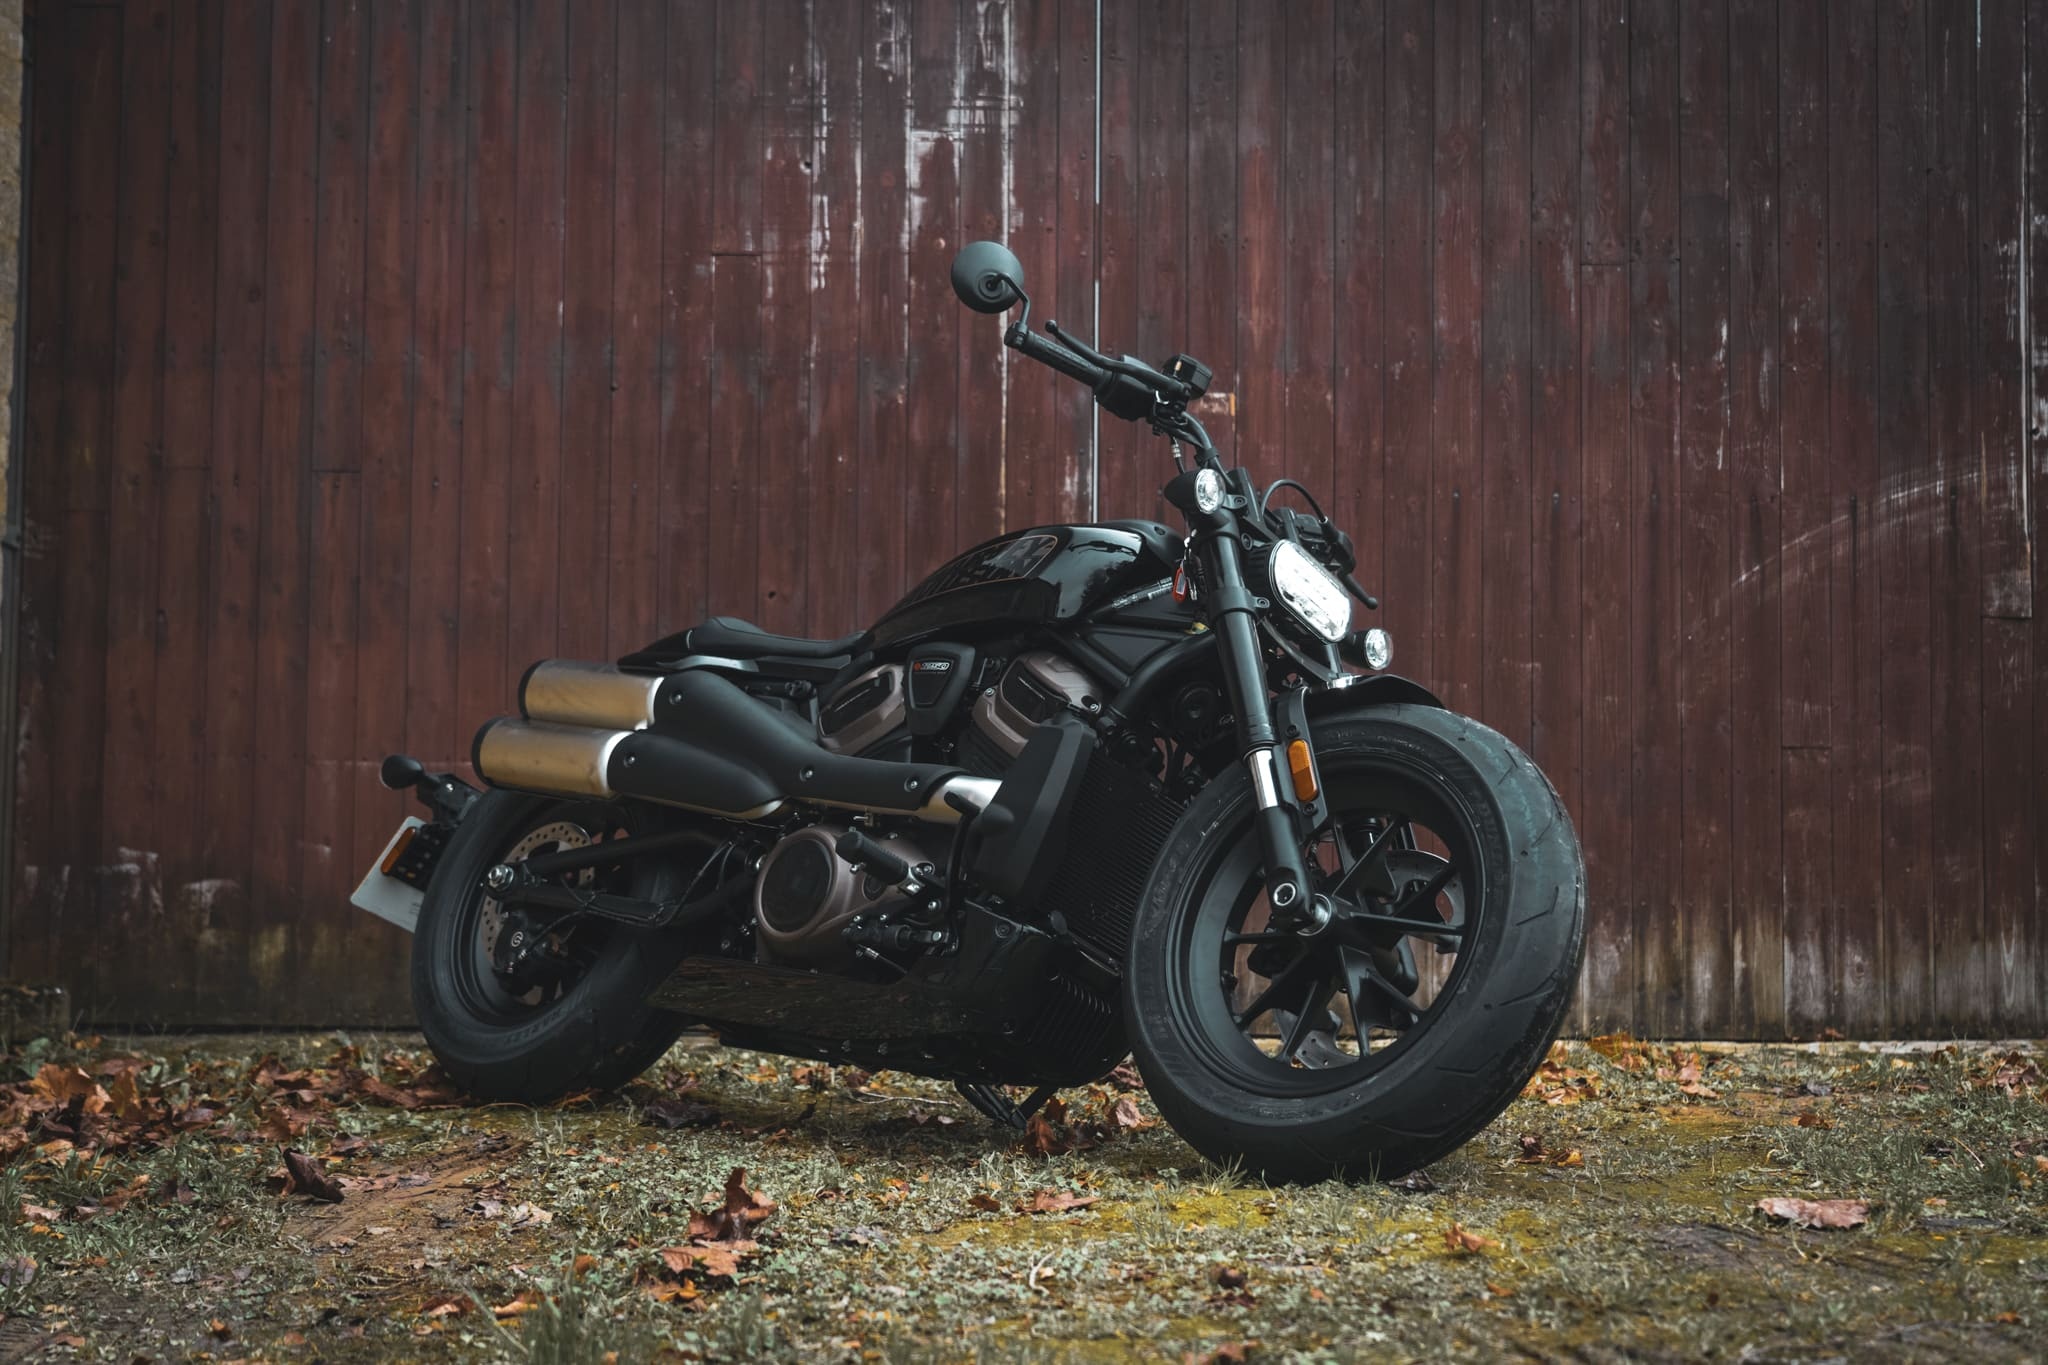 Harley-Davidson Sportster S, Brand new model, Stunning appearance, Aspire competitions, 2050x1370 HD Desktop